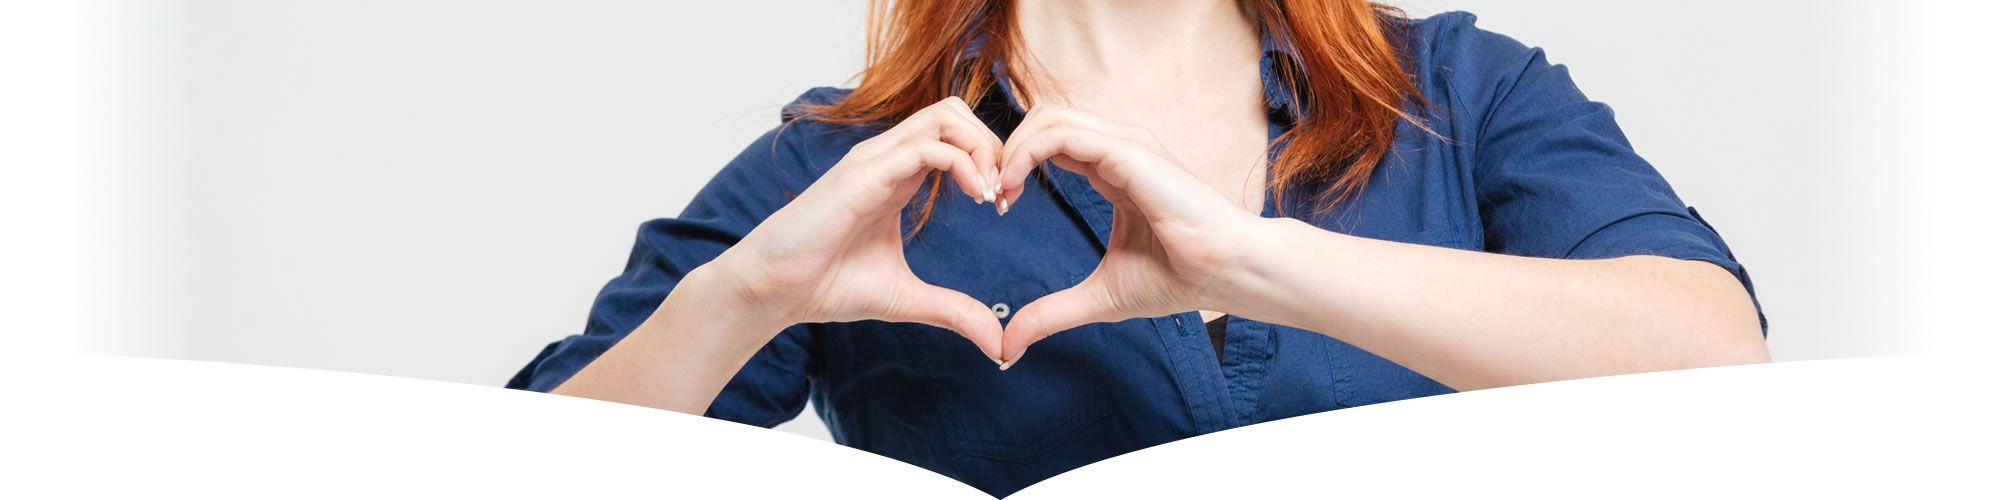 Lady showing heart symbol whilst giving testimonial